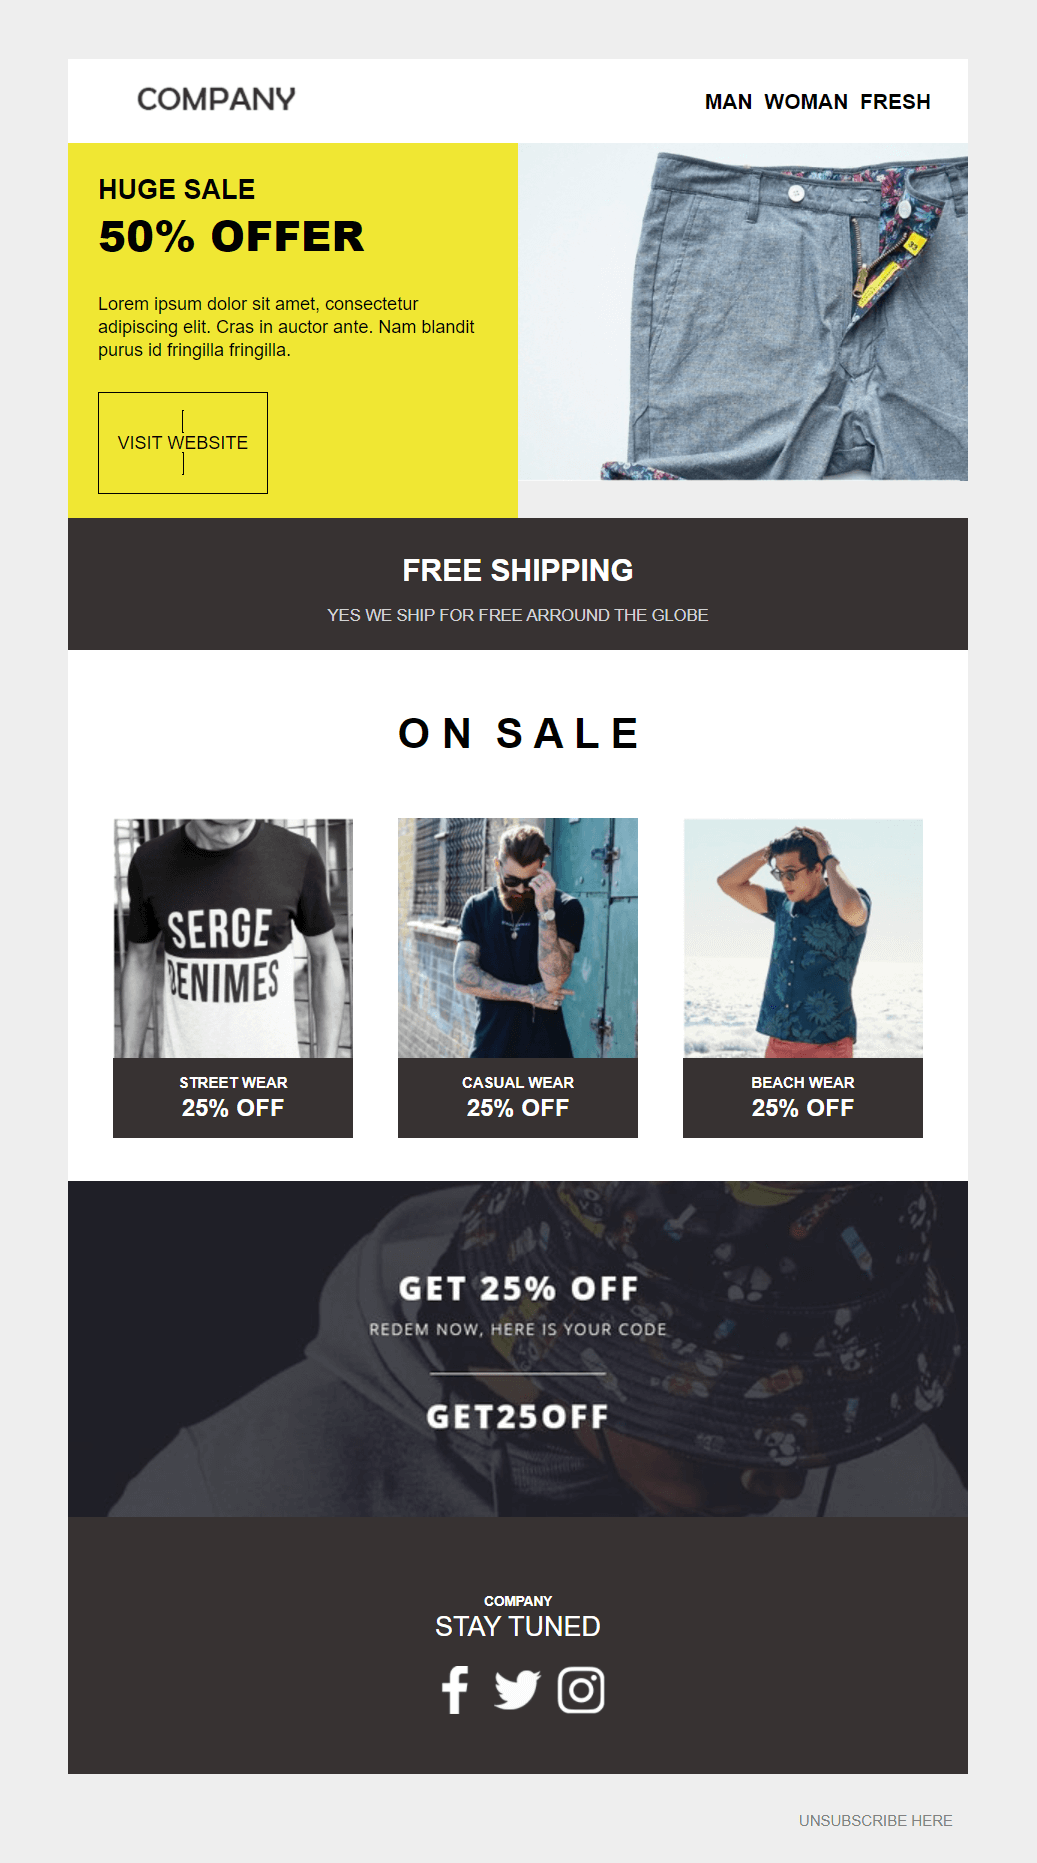 15 Clearance Sale Campaign ideas  email design inspiration, email design,  marketing design